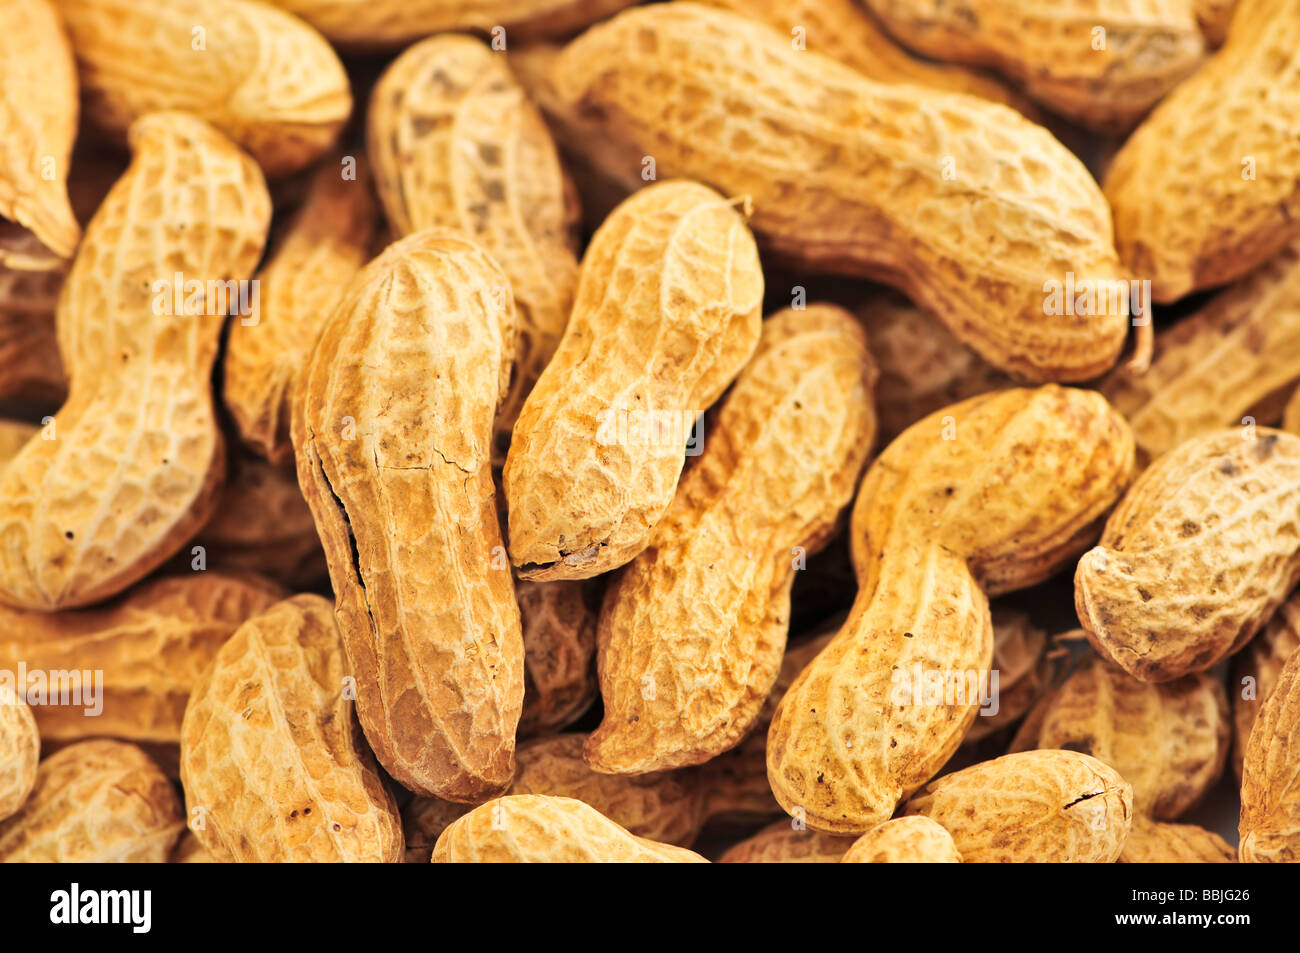 Closeup on pile of peanuts with shells Stock Photo